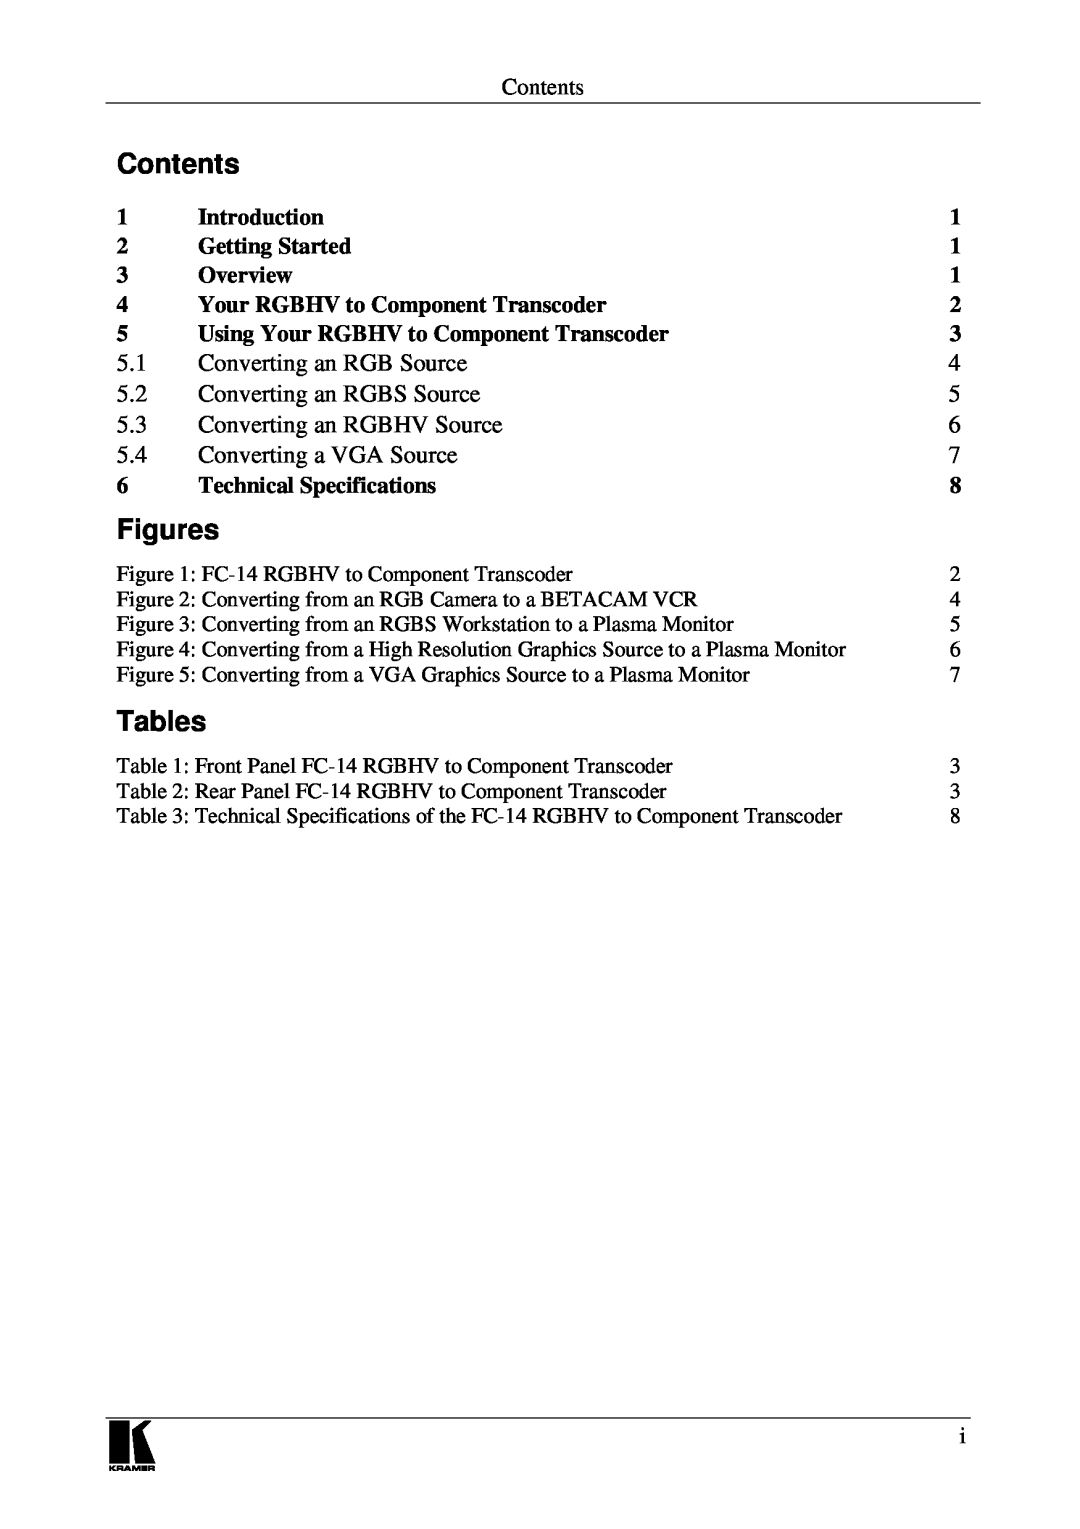 Kramer Electronics FC-14 Contents, Figures, Tables, Introduction, Getting Started, Overview, Technical Specifications 